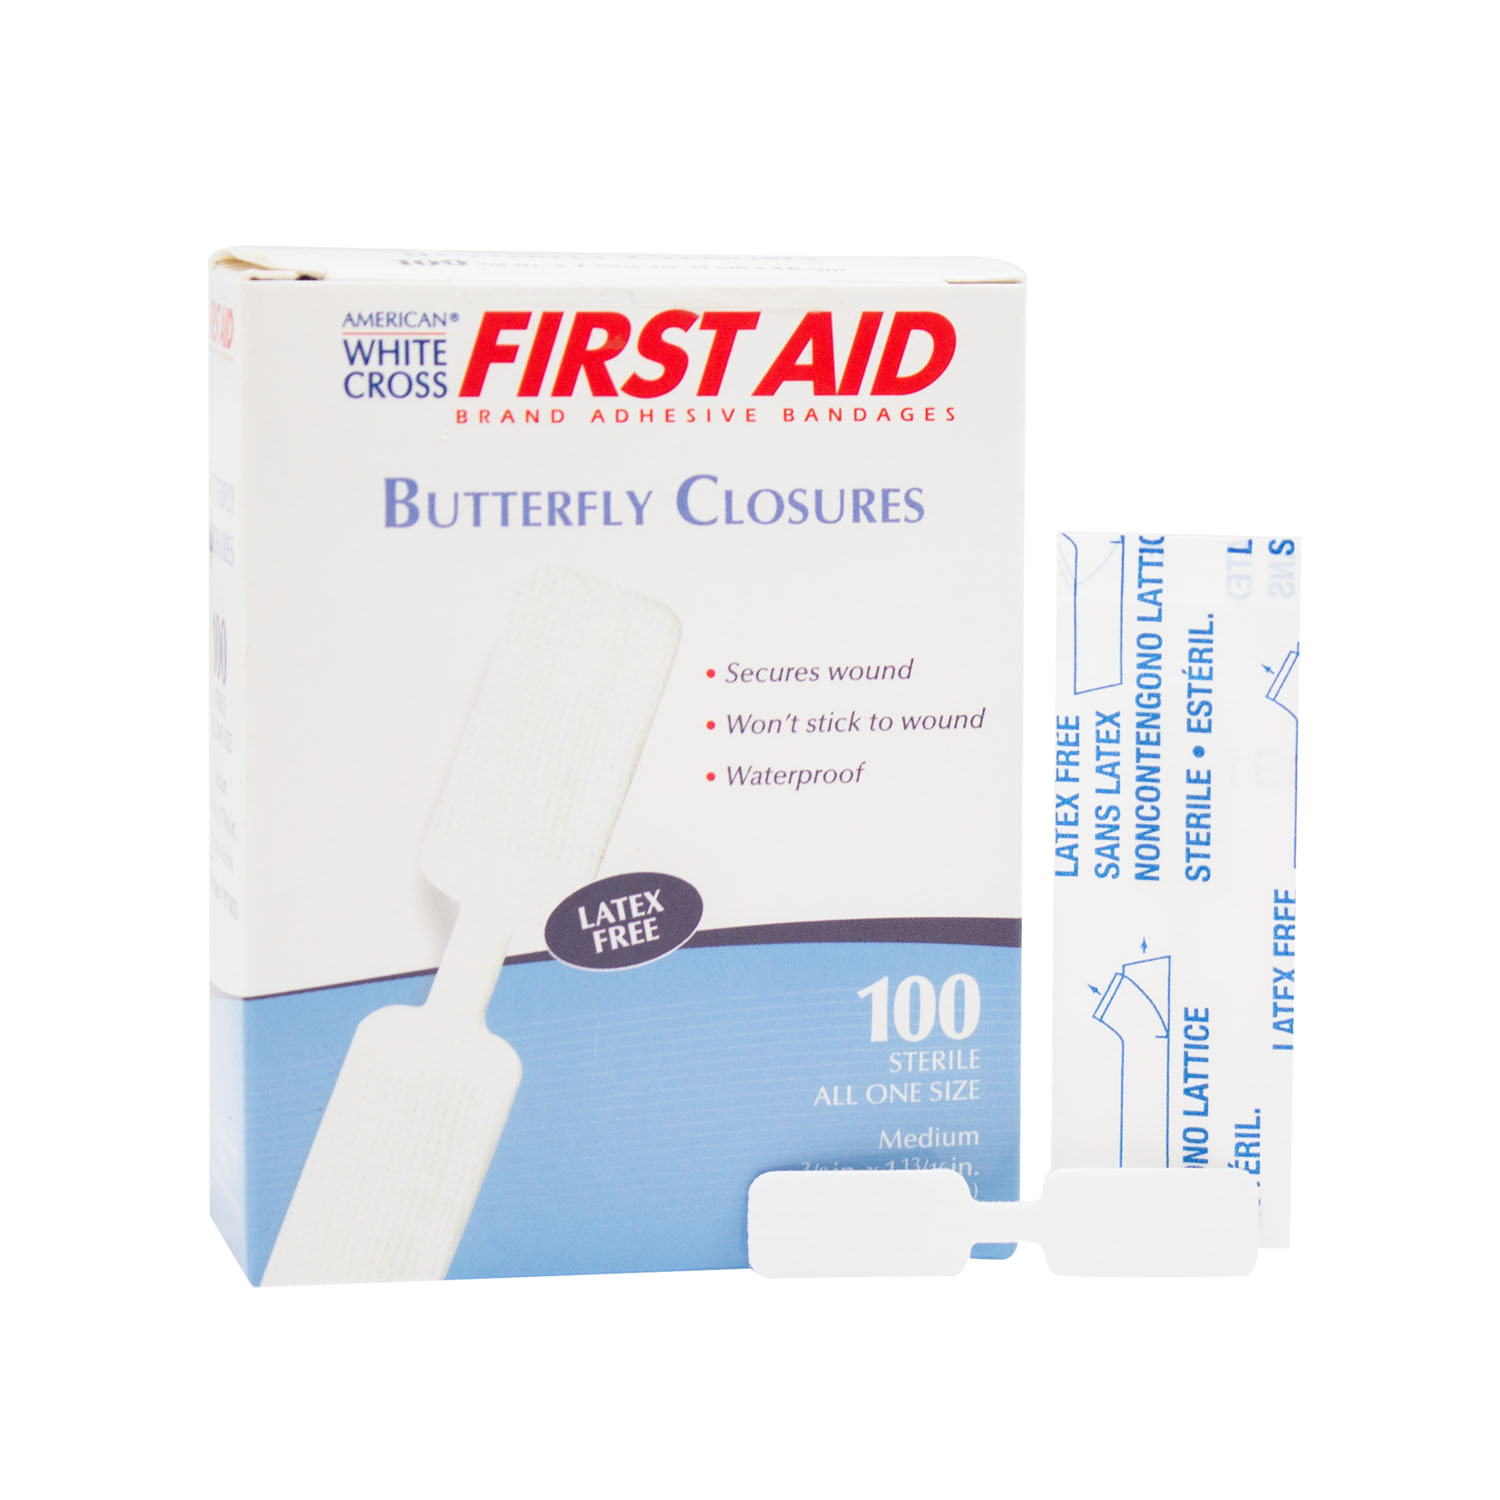 DUKAL BUTTERFLY CLOSURES ADHESIVE BANDAGES : 1975033 BX $5.89 Stocked